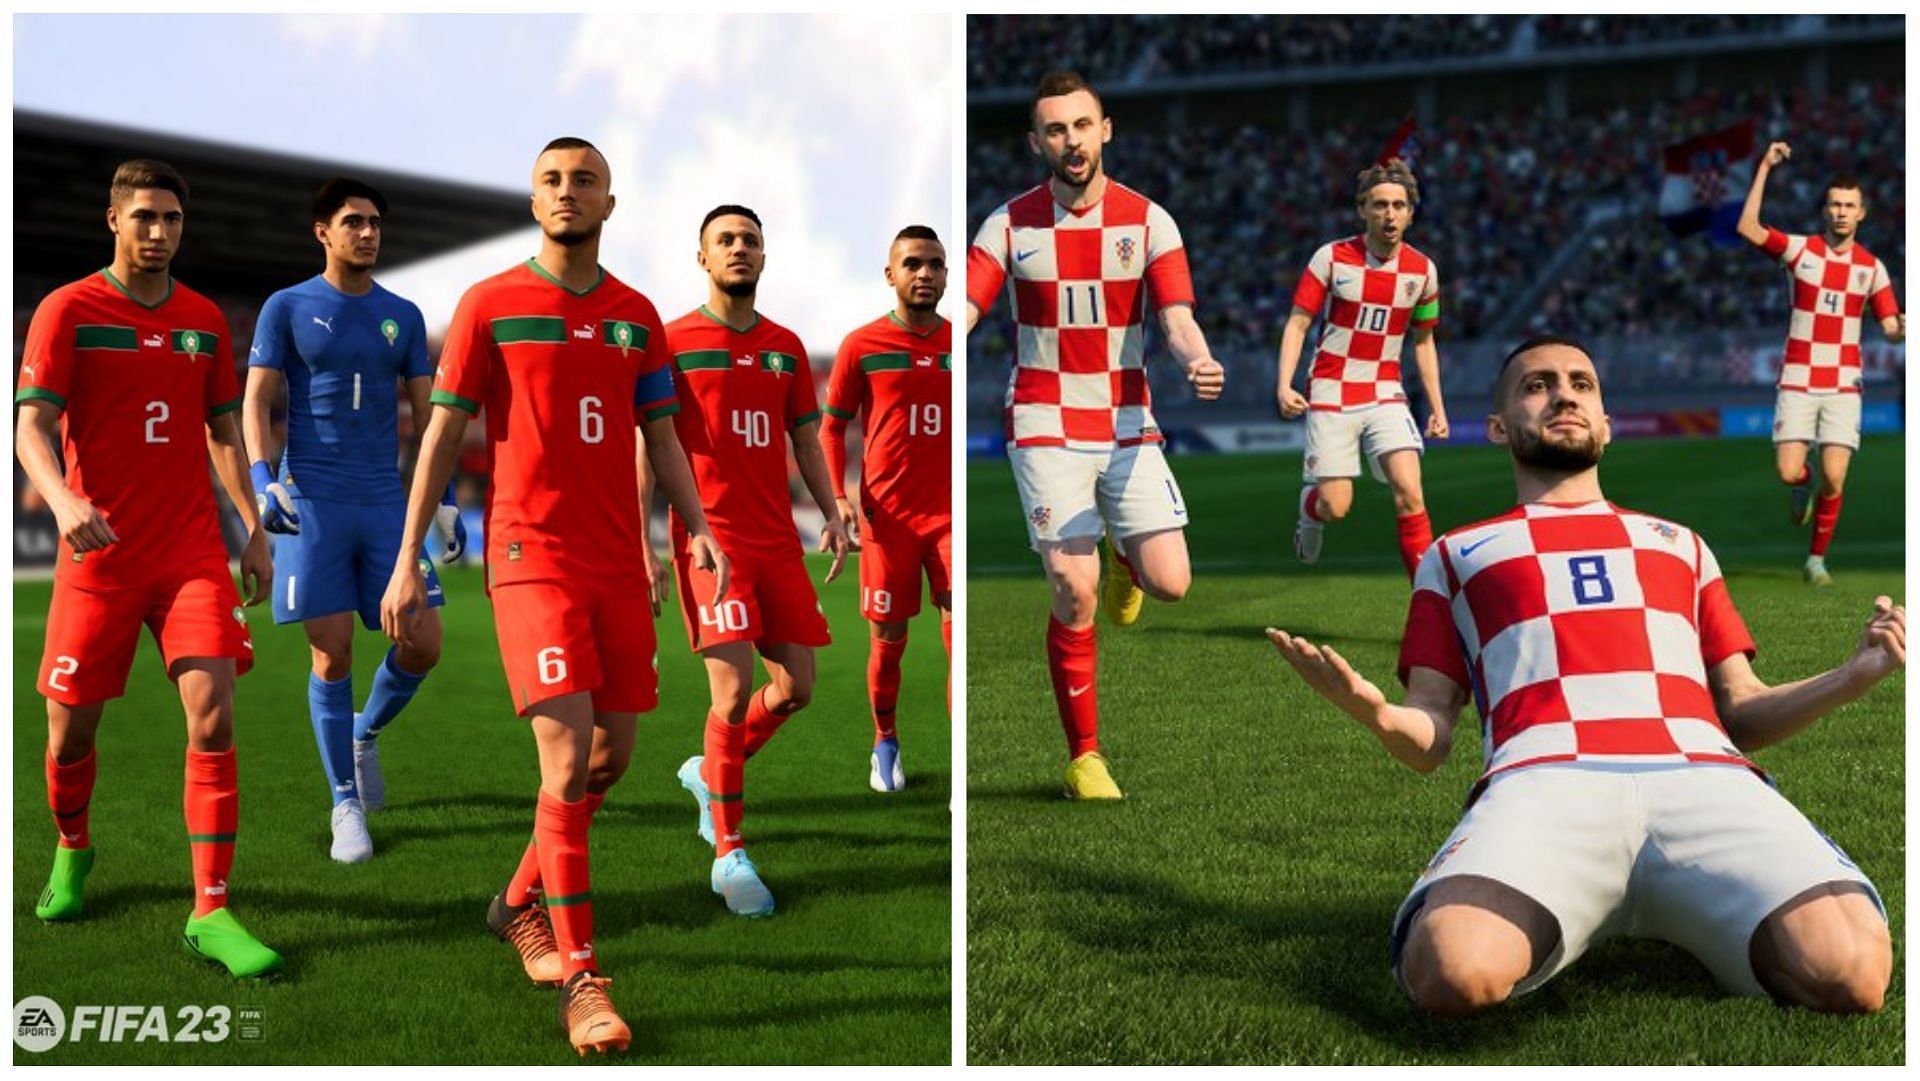 The World Cup mode is coming to FIFA 23 (Images via EA Sports)